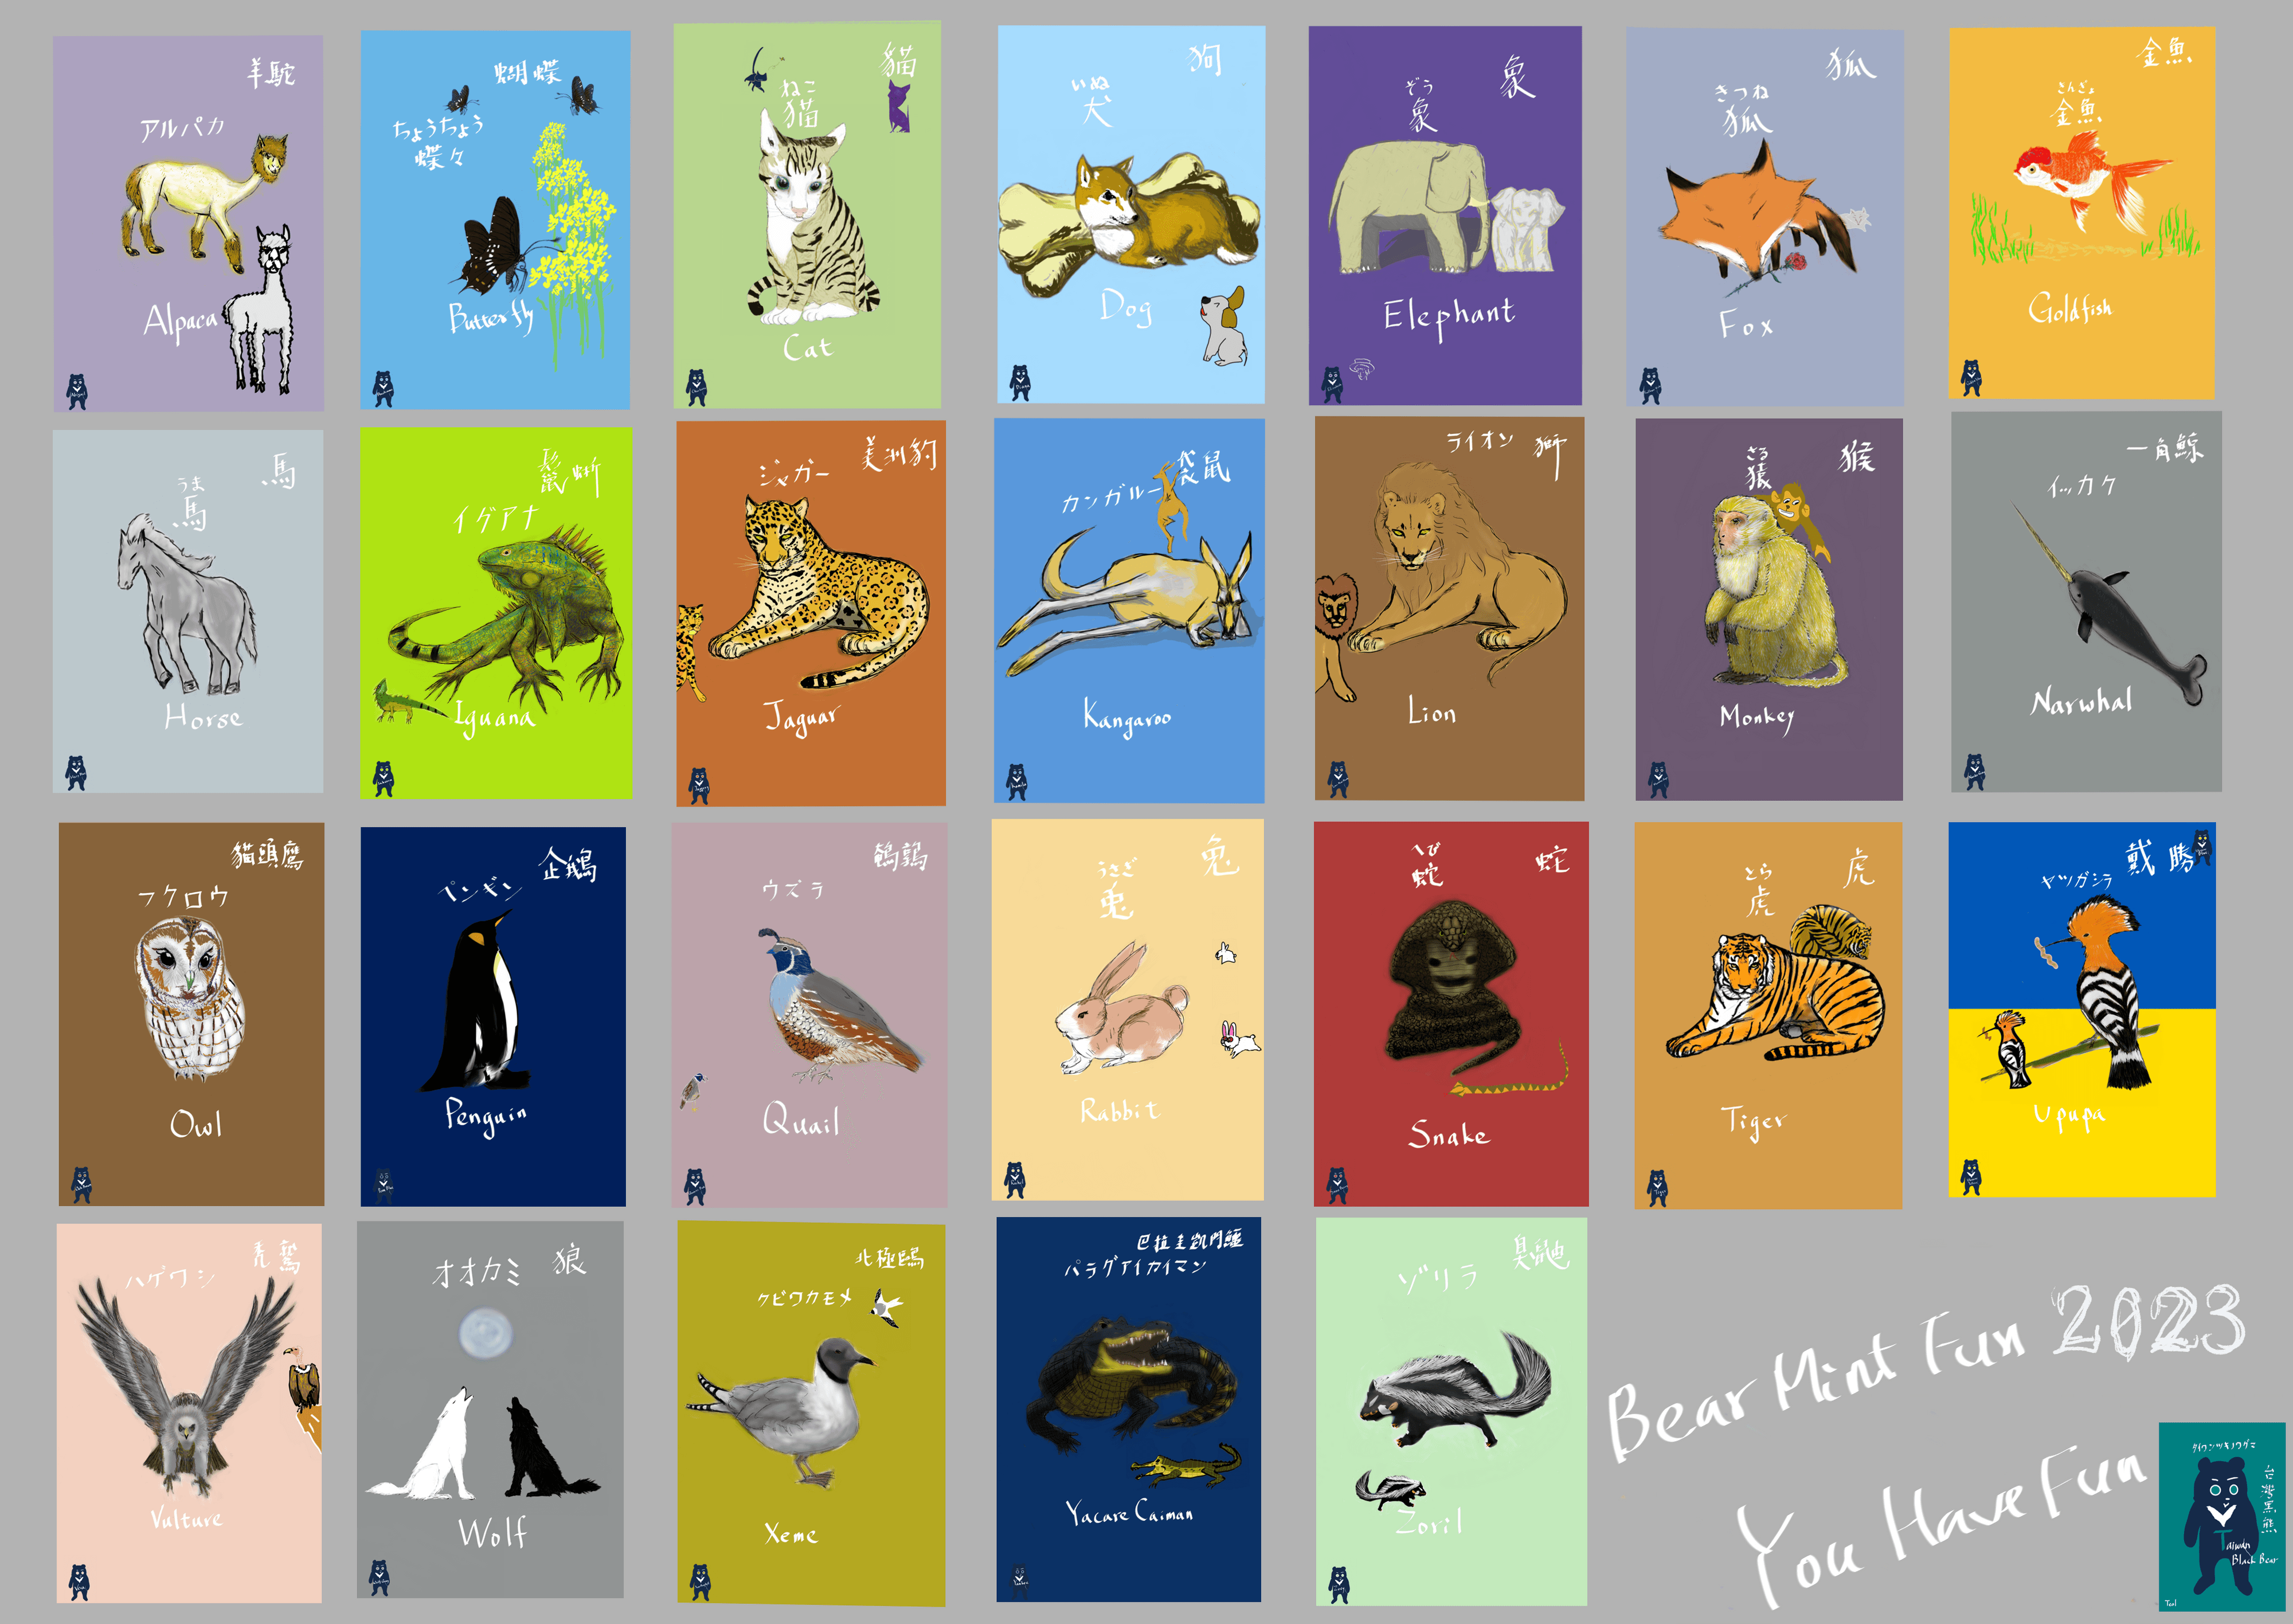 A-Z Animals 2023 Learning Board